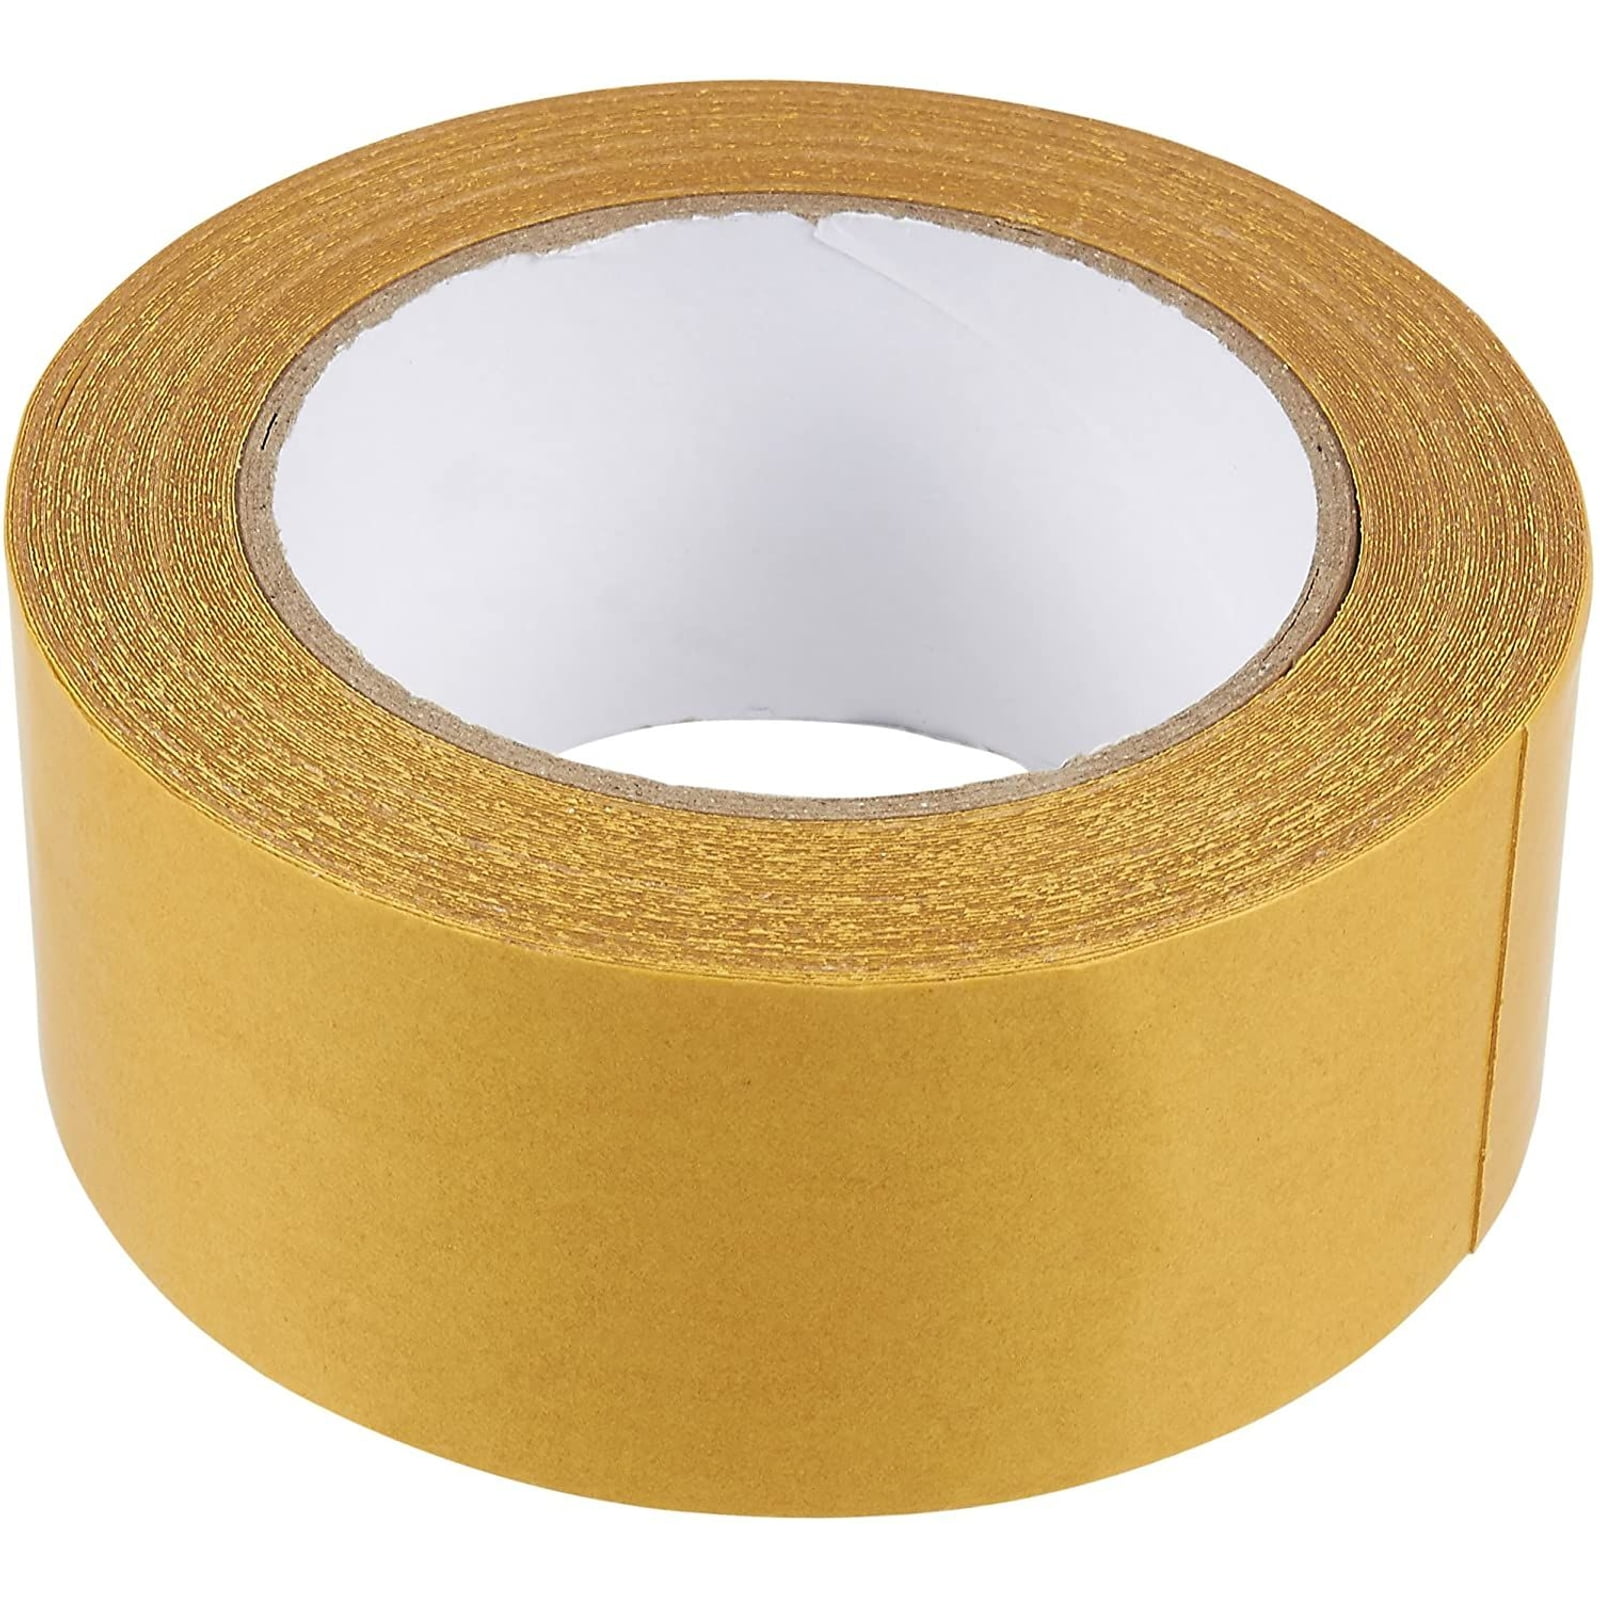 Eterart Double Sided Carpet Tape Heavy Duty for Area Rugs,Tile Hardwood  Floors,Over Carpet,Rug Tape High Adhesive and Removable,Strong Sticky